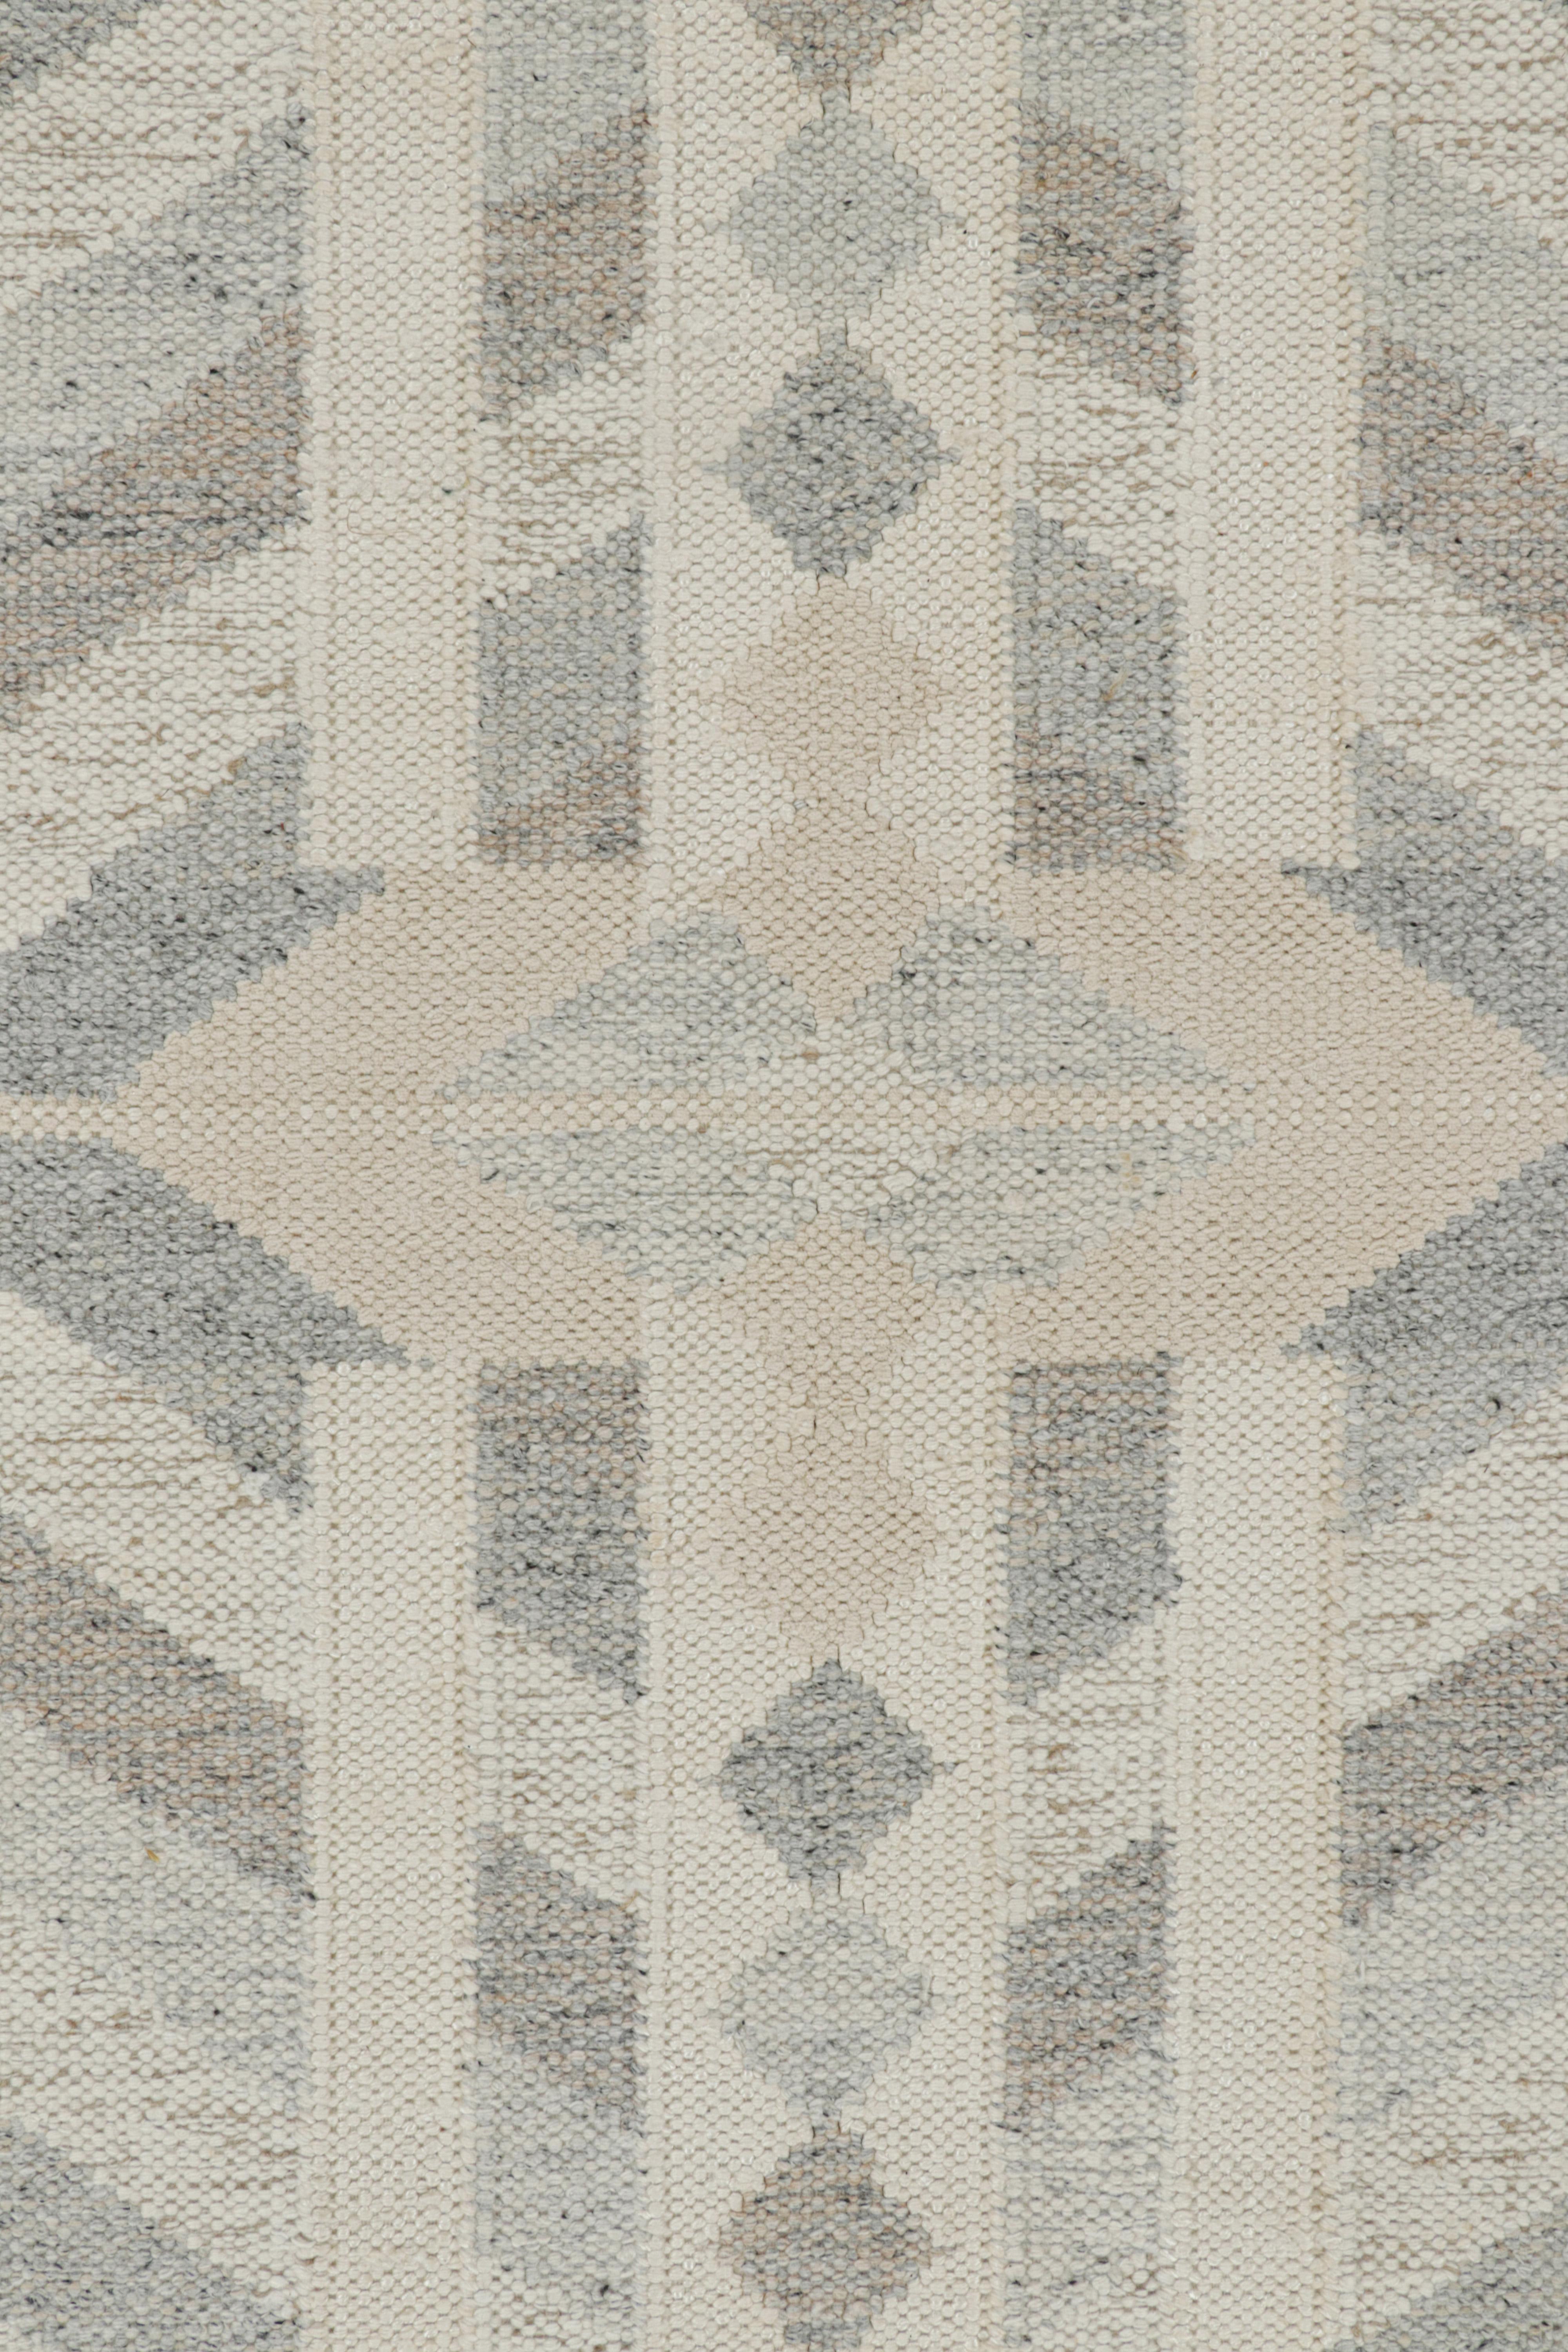 Modern Rug & Kilim’s Scandinavian Style Rug in Gray Beige and White Geometric Patterns For Sale